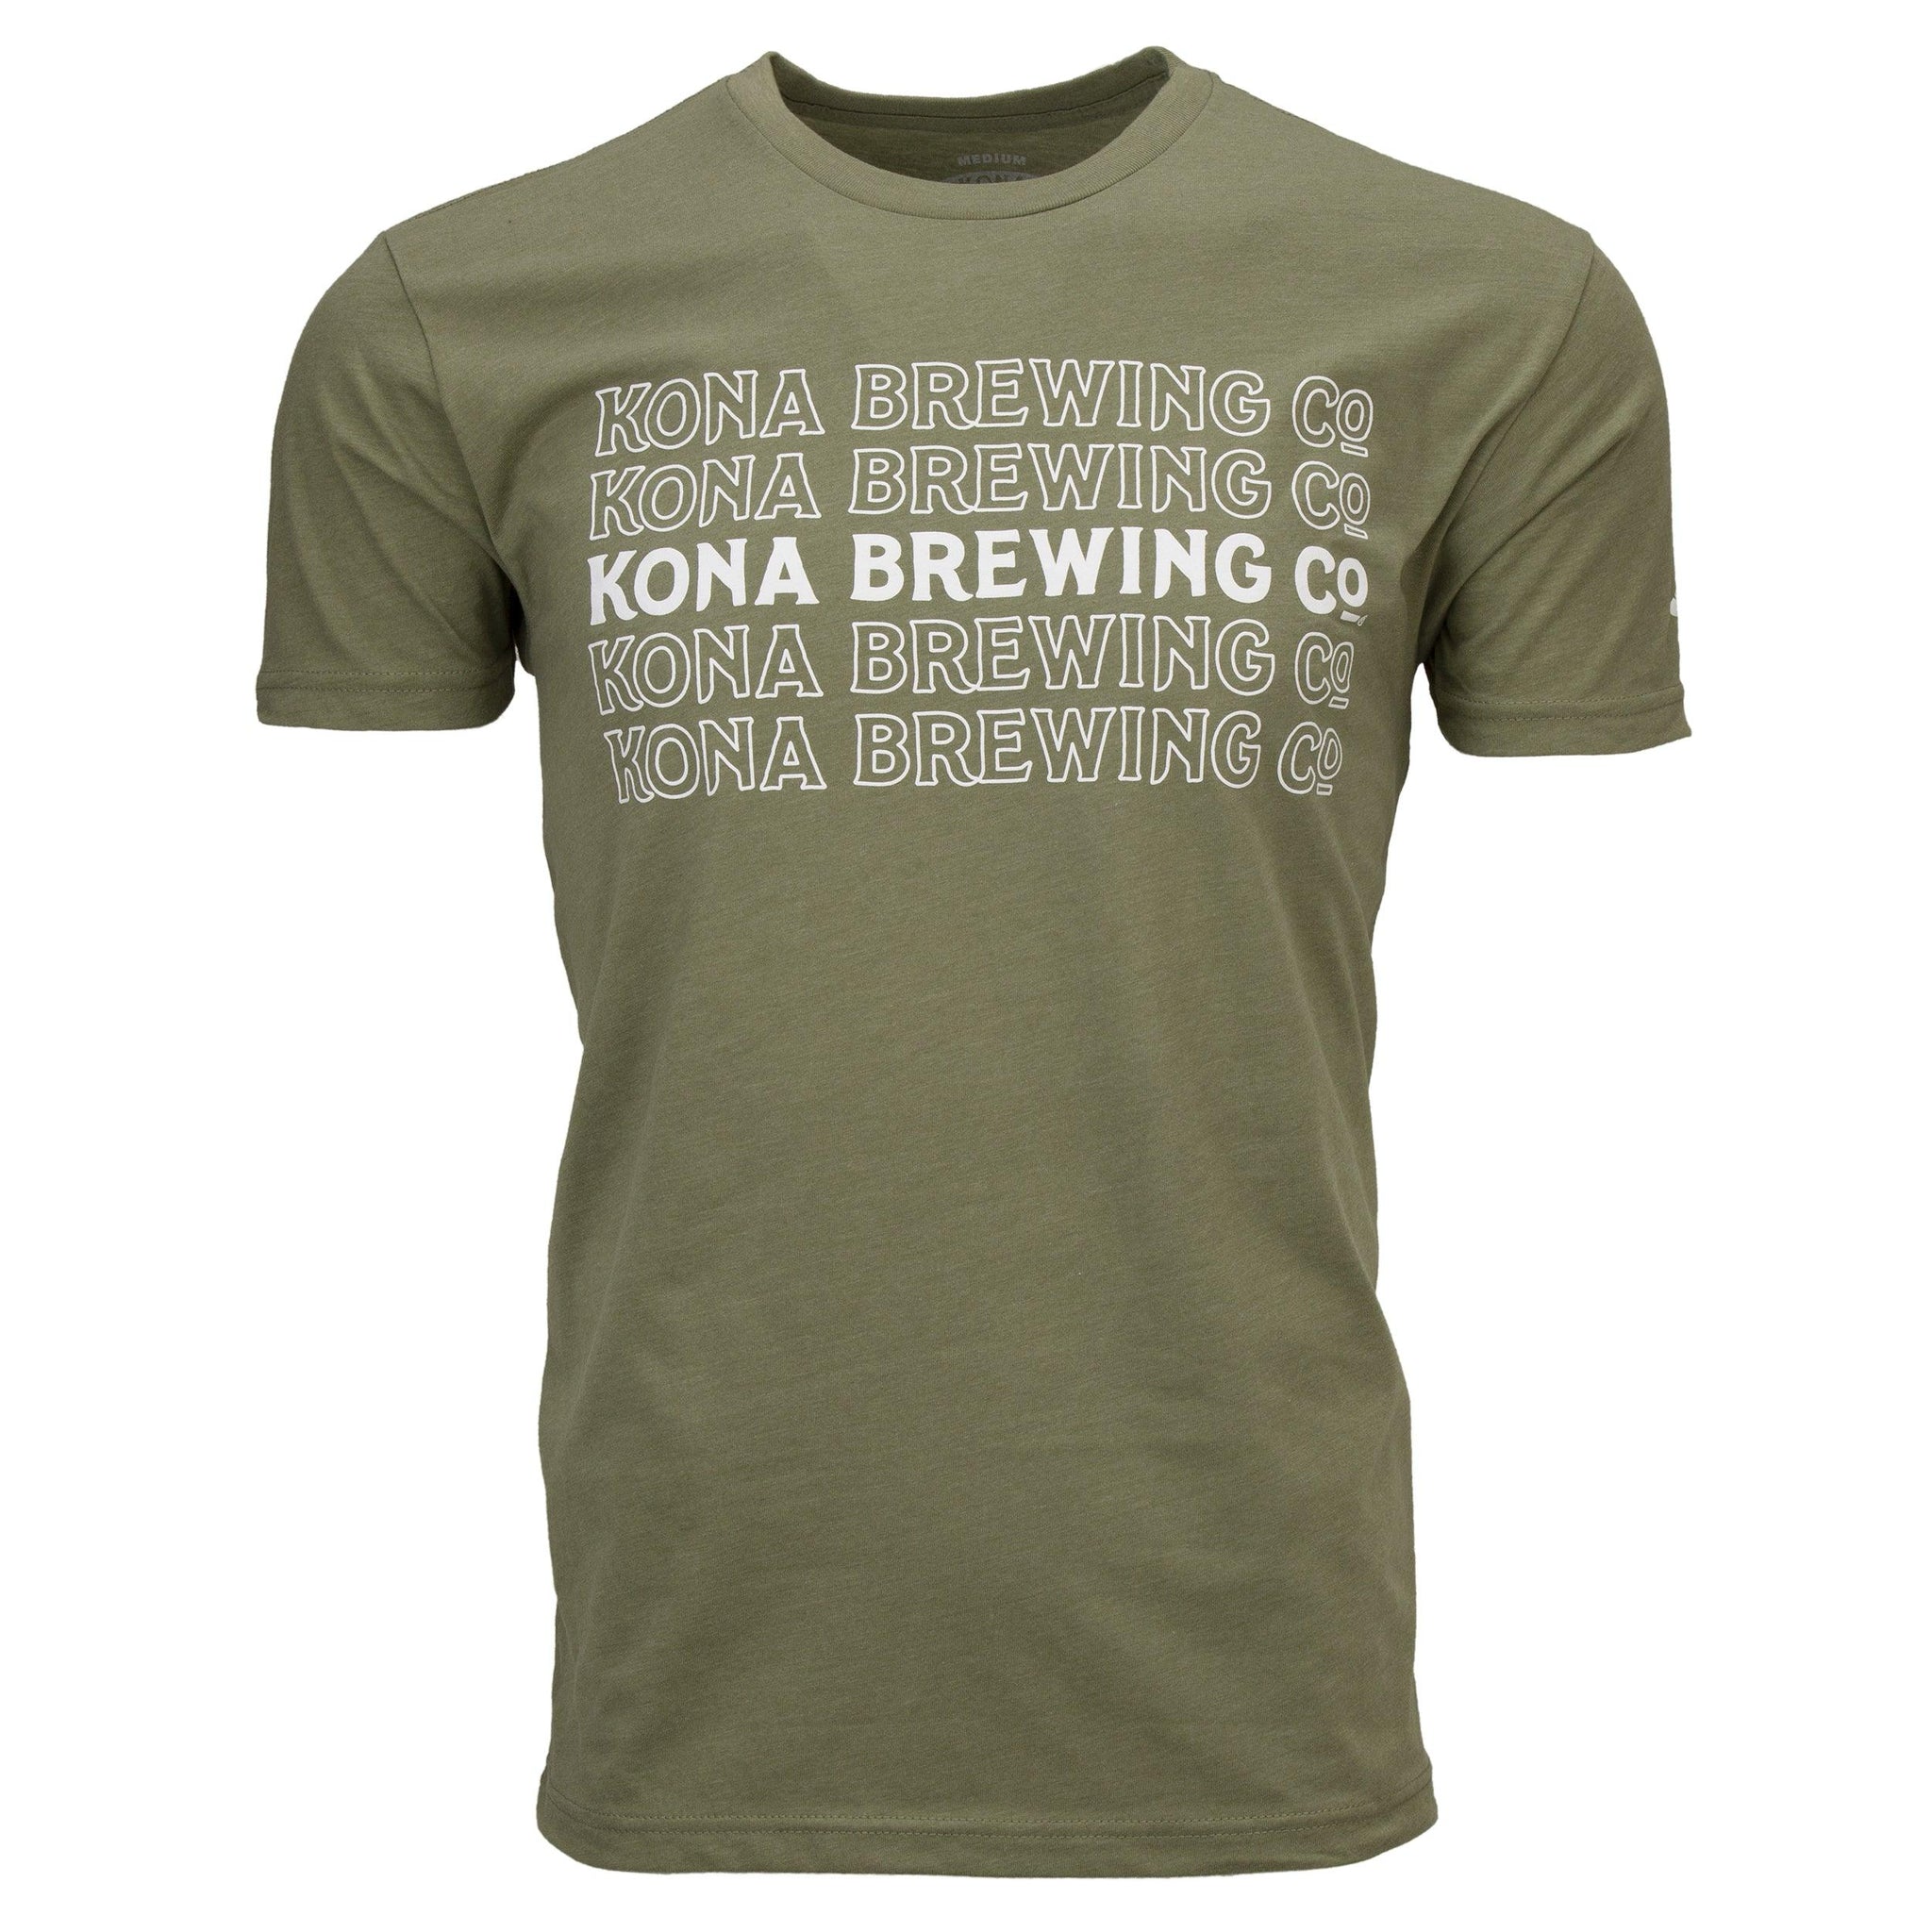 Kona Brewing Co Repeat Tee – Light Olive